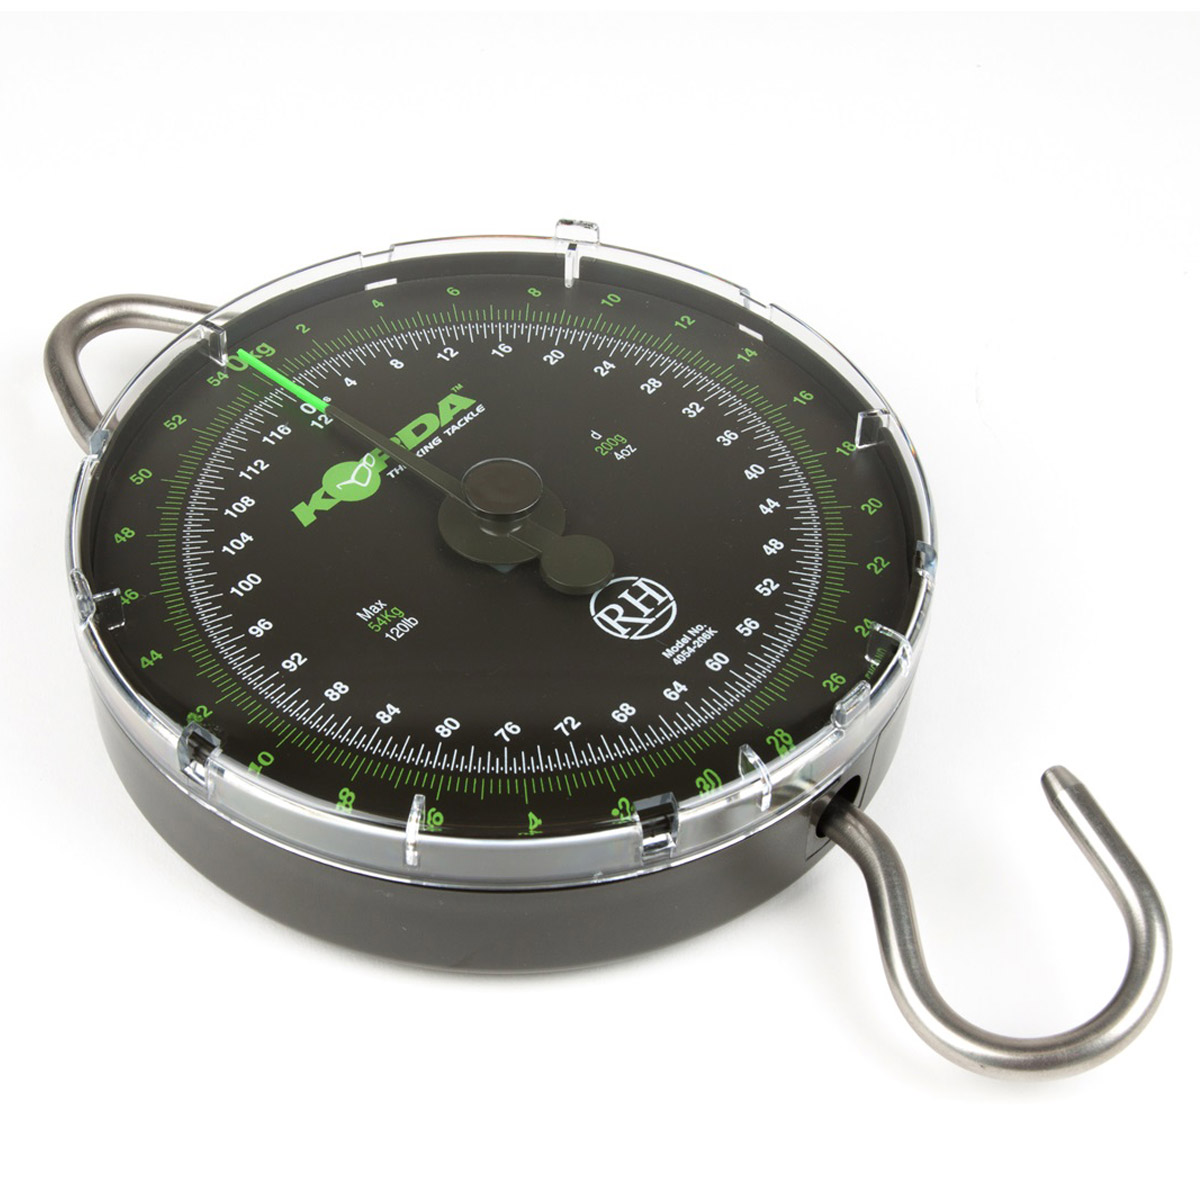 Korda Limited Edition Scales -  60 lb